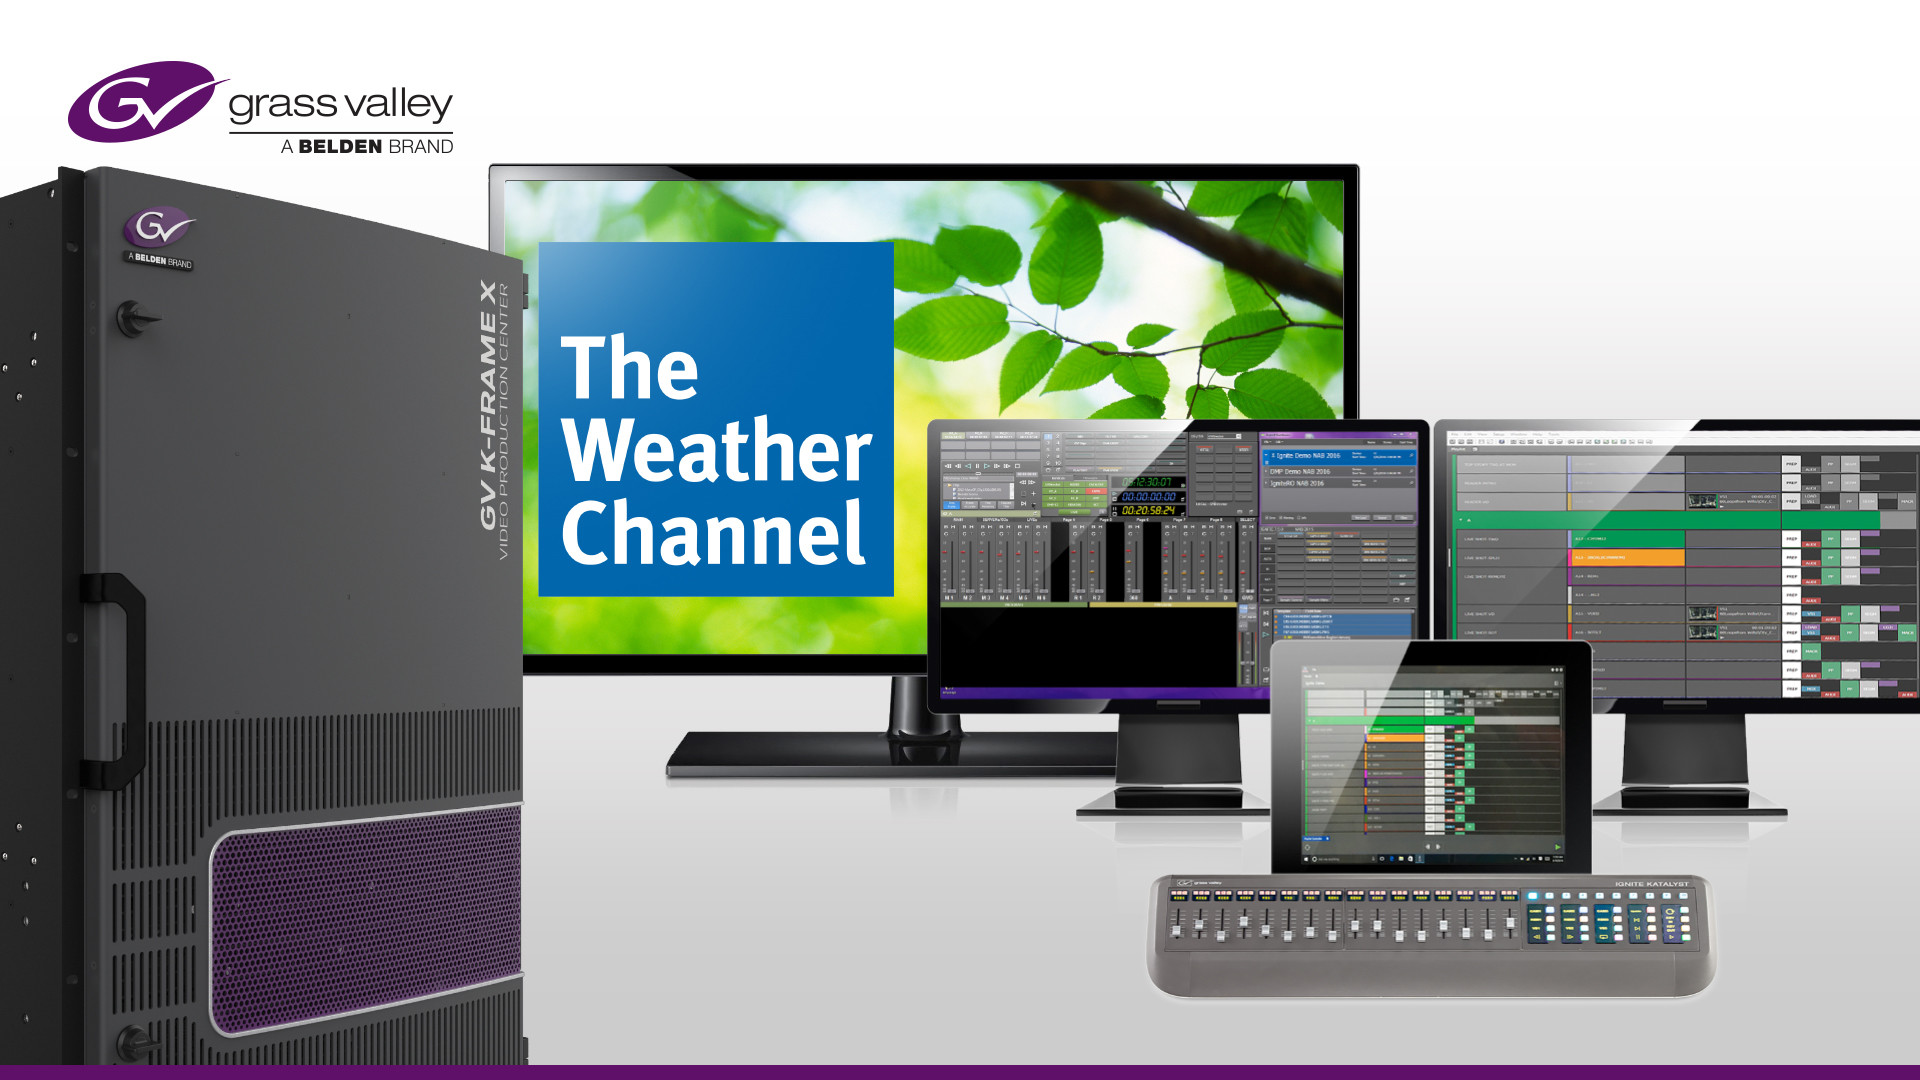 1920x1080 Press Release: The Weather Channel Purchases Kayenne and Ignite Combo for  Improved Live Production Capabilities